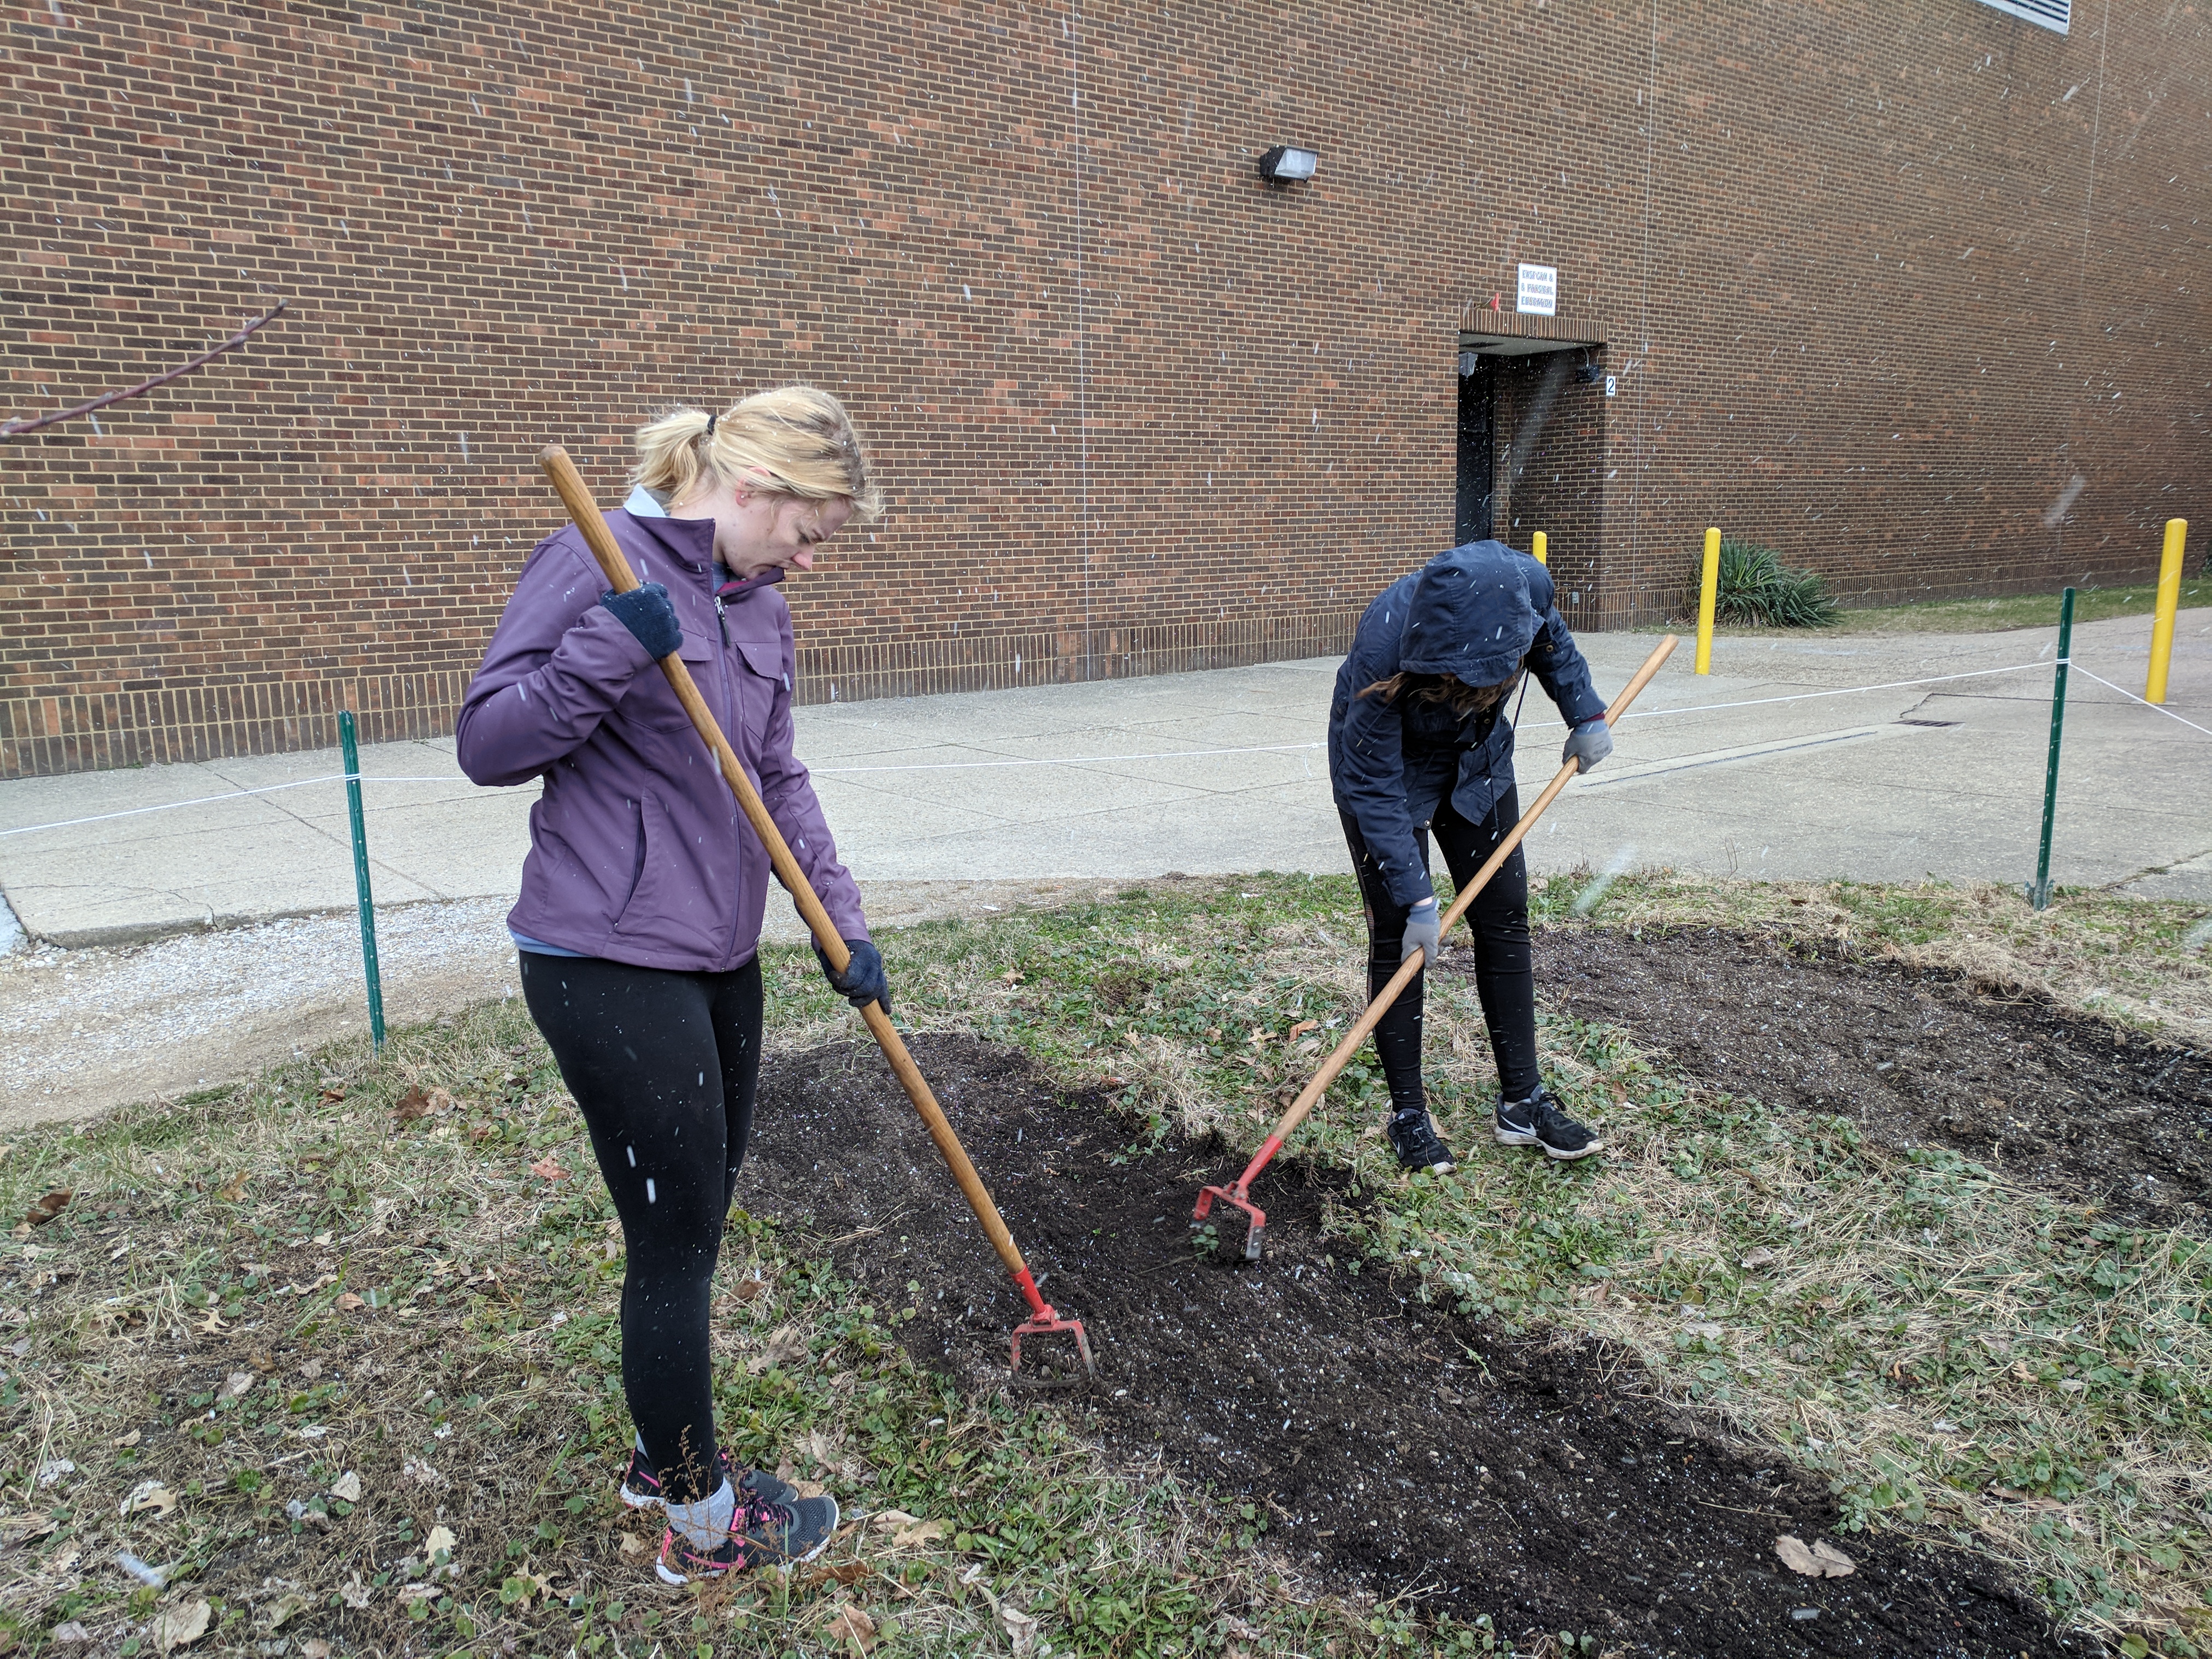 Students used hoes to freshen the top layer of the soil.